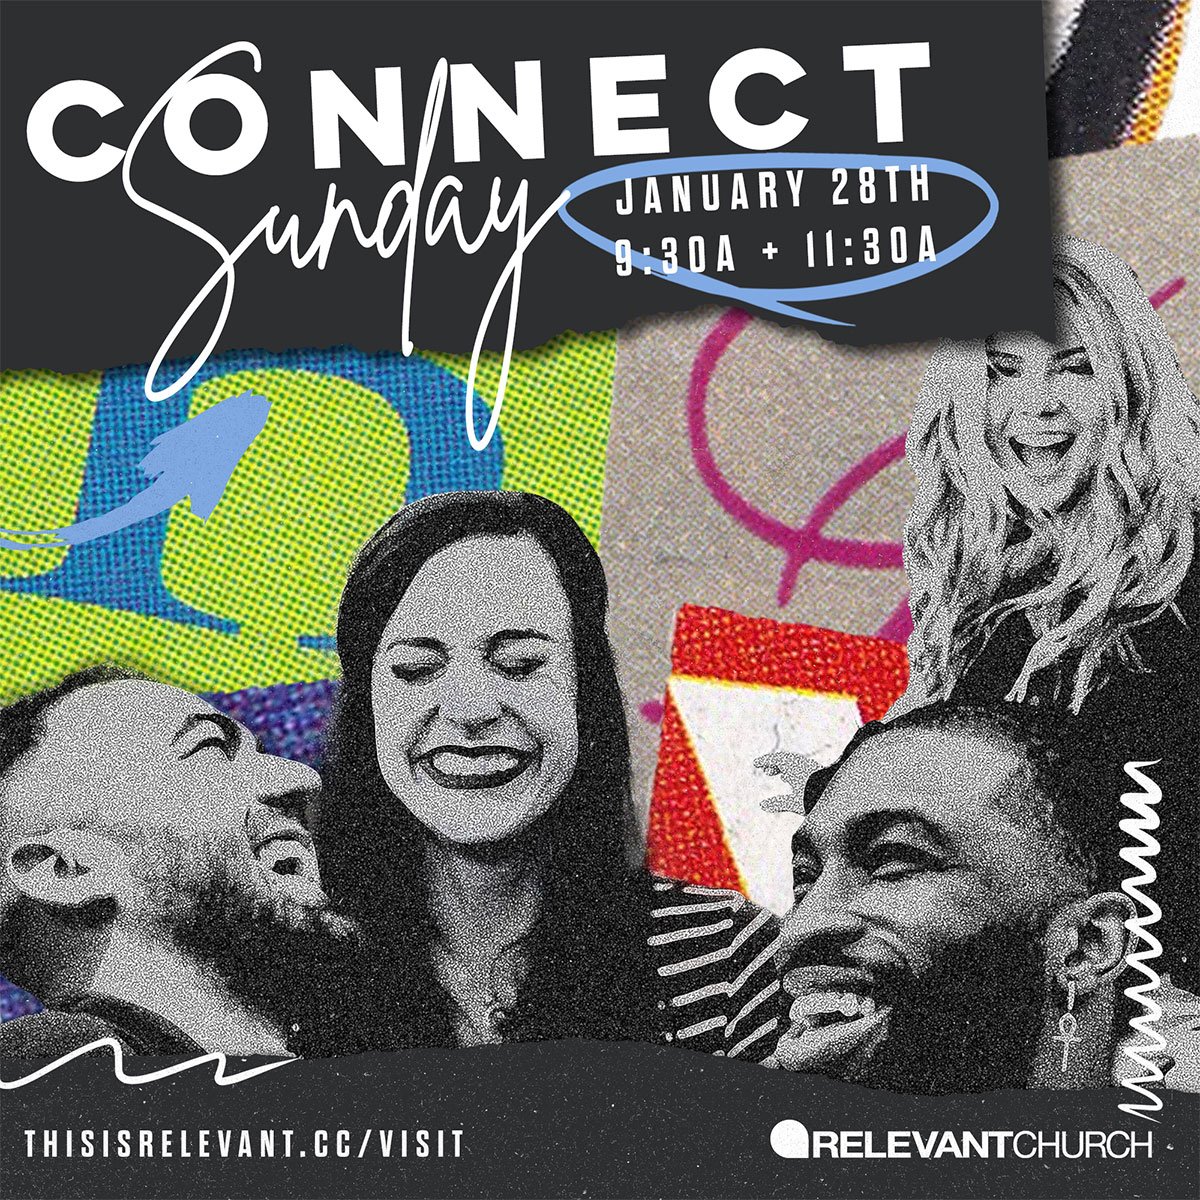 Connect-Sunday-Square.jpg